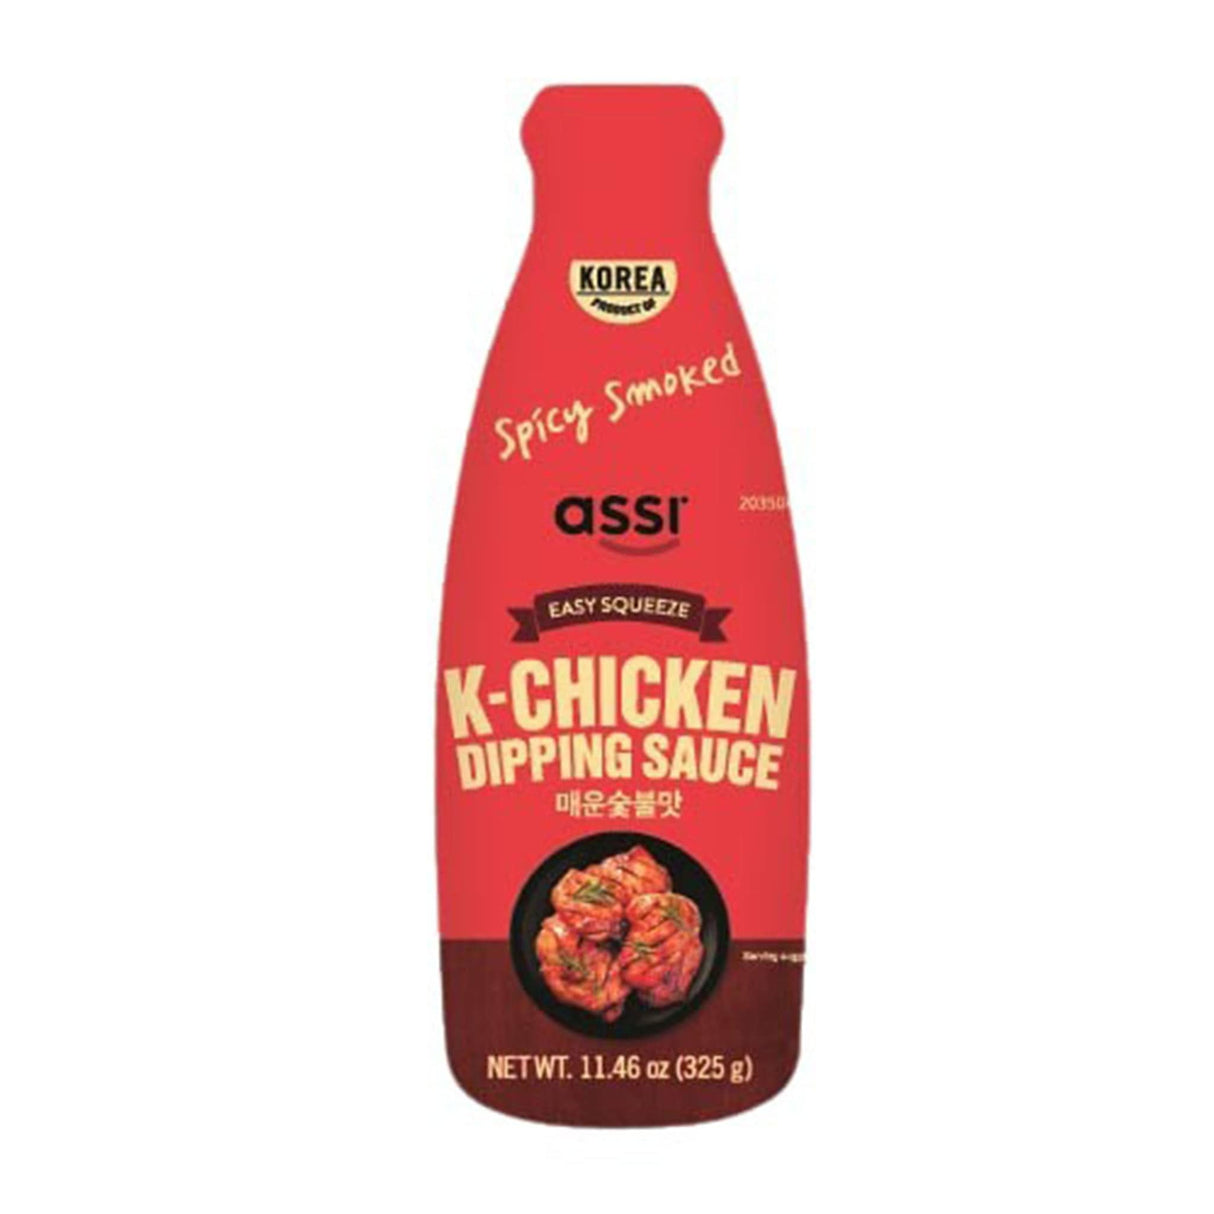 Assi K-Chicken Spicy Smoked Dipping Sauce